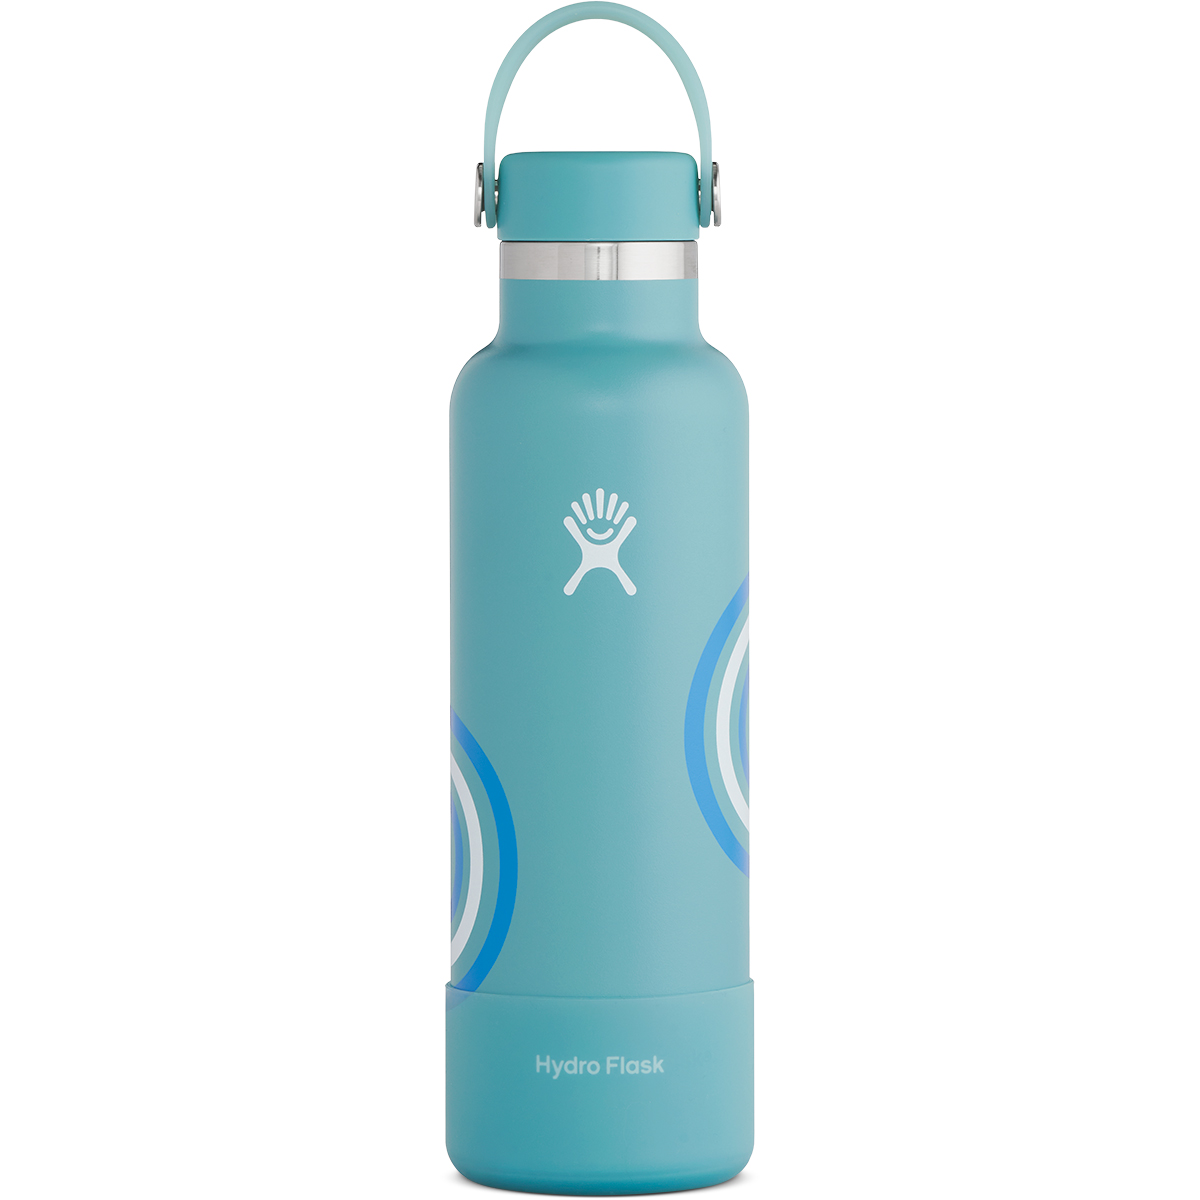 Hydro Flask Refill For Good Limited Edition 21 Oz. Standard Mouth Water Bottle